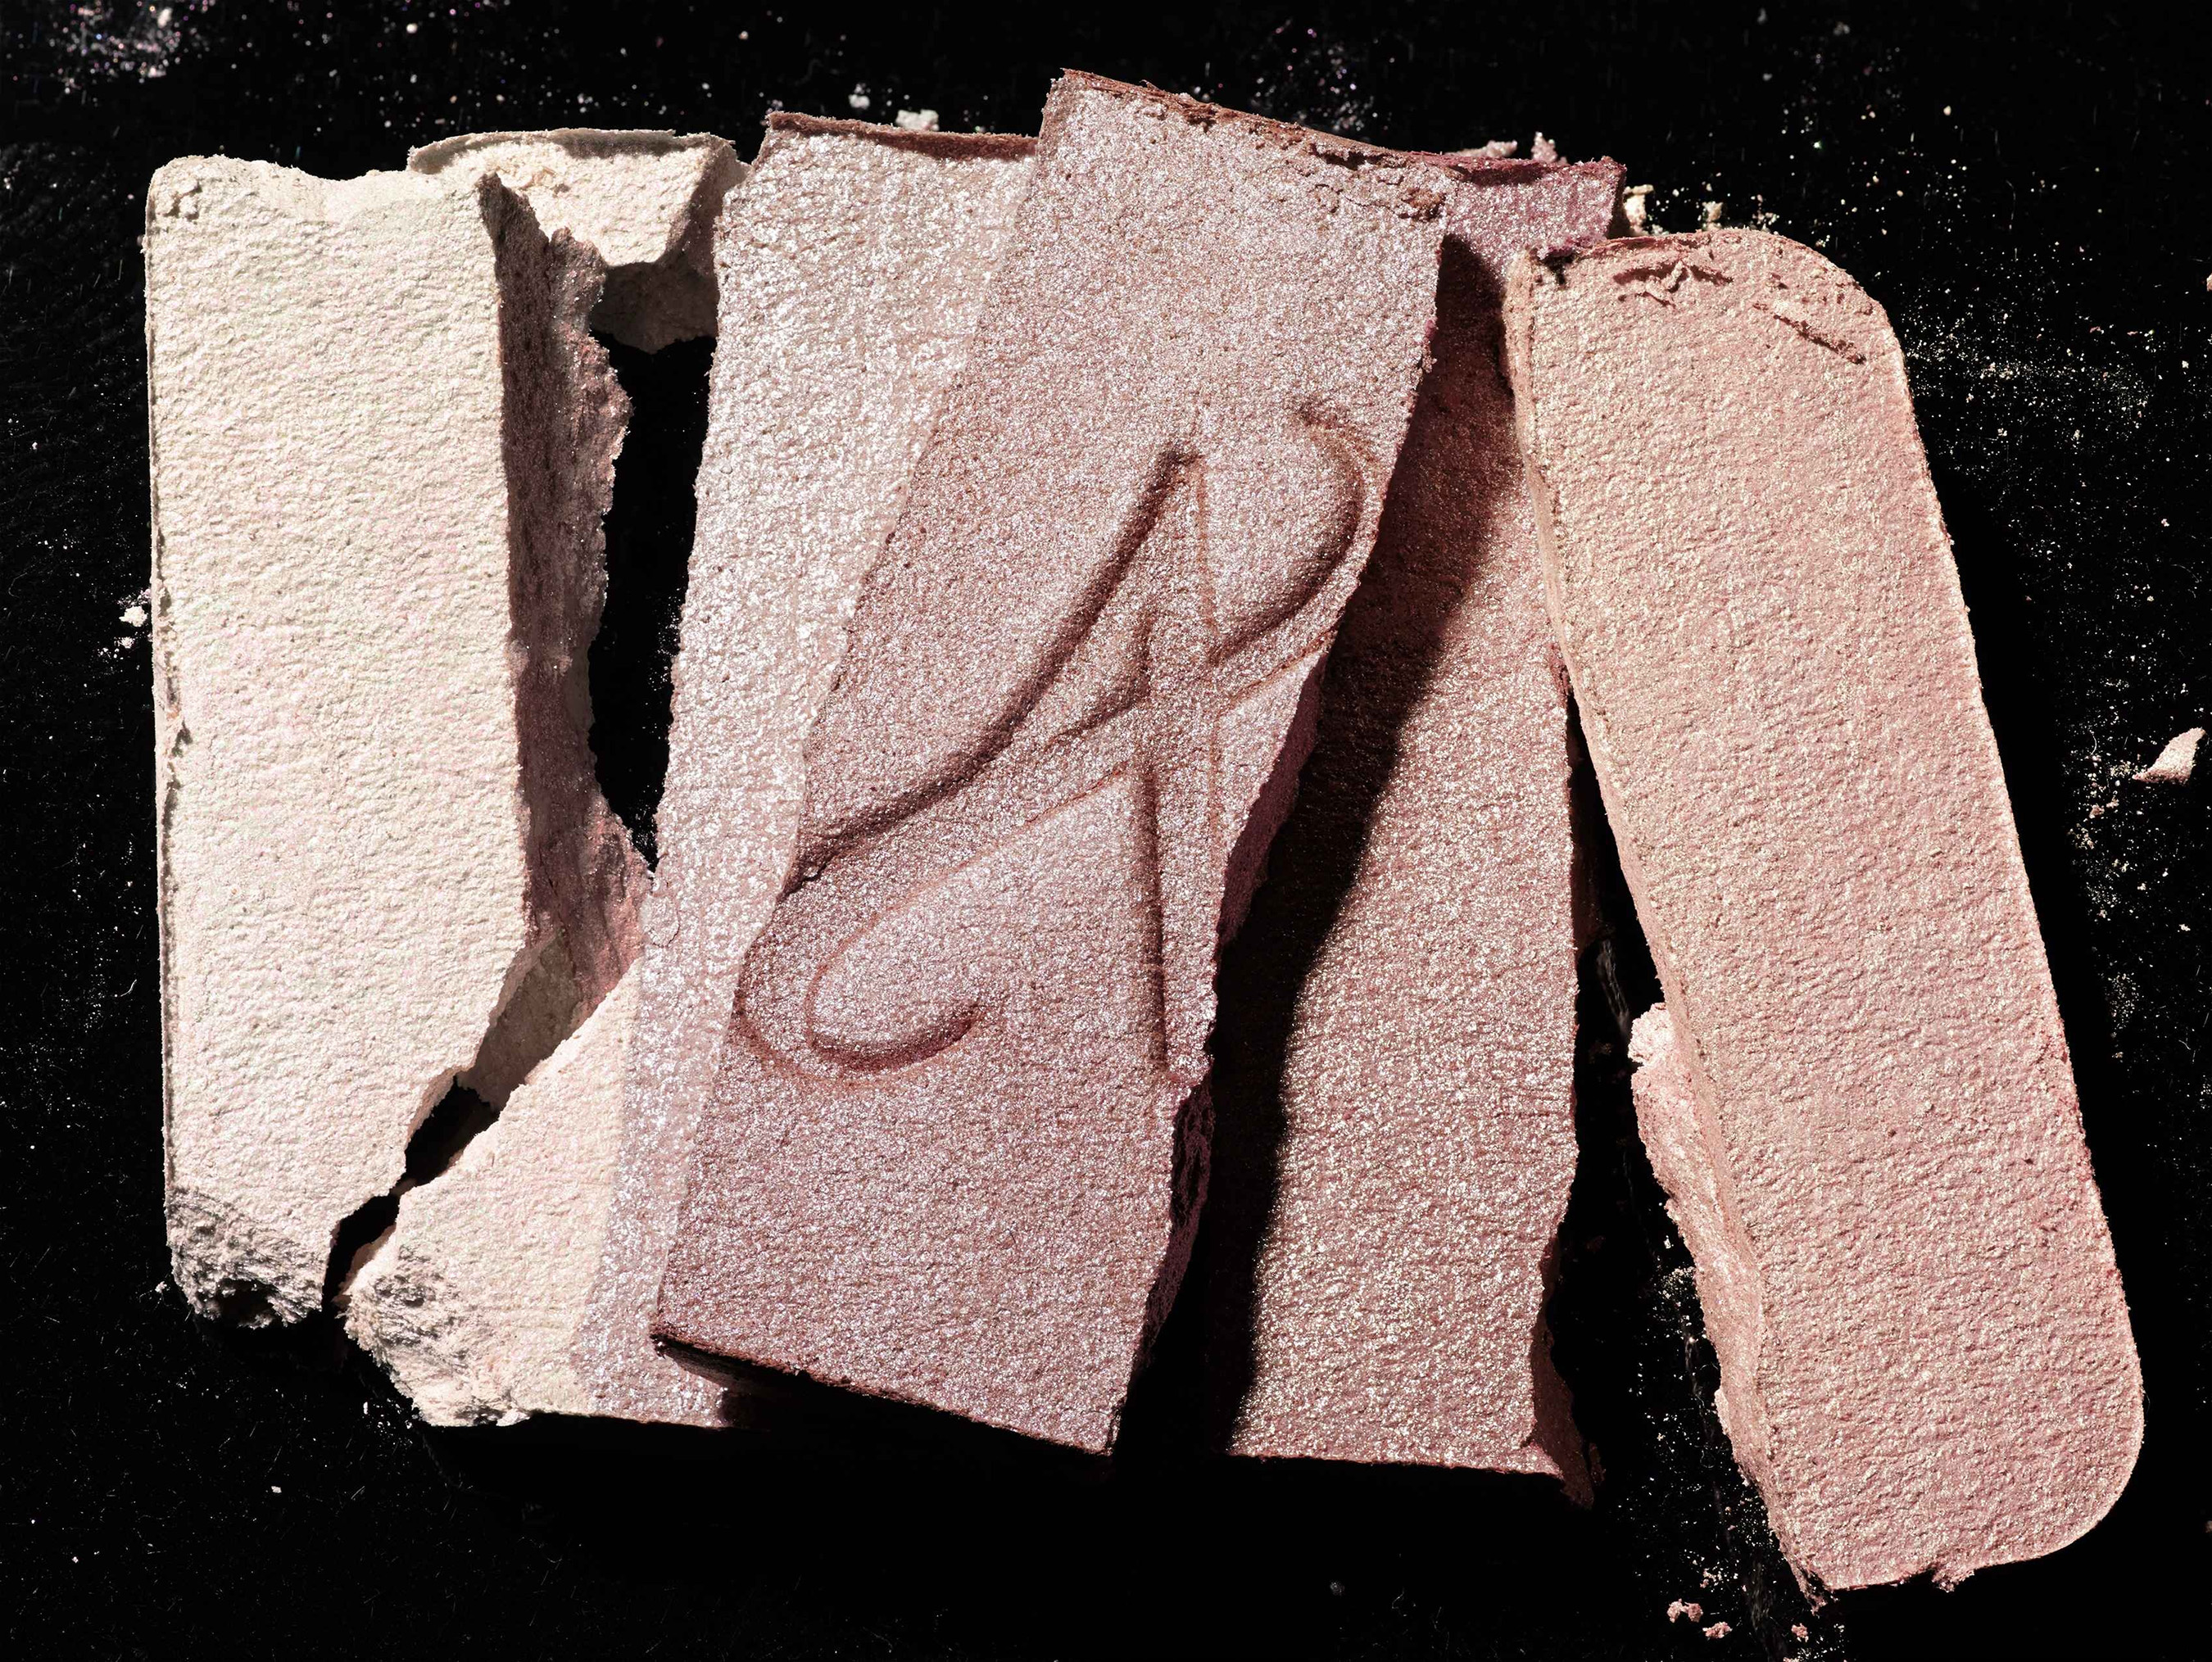 Rose Diamond 3D Face Powder: five hues transitioning from pink champagne to dark bronze